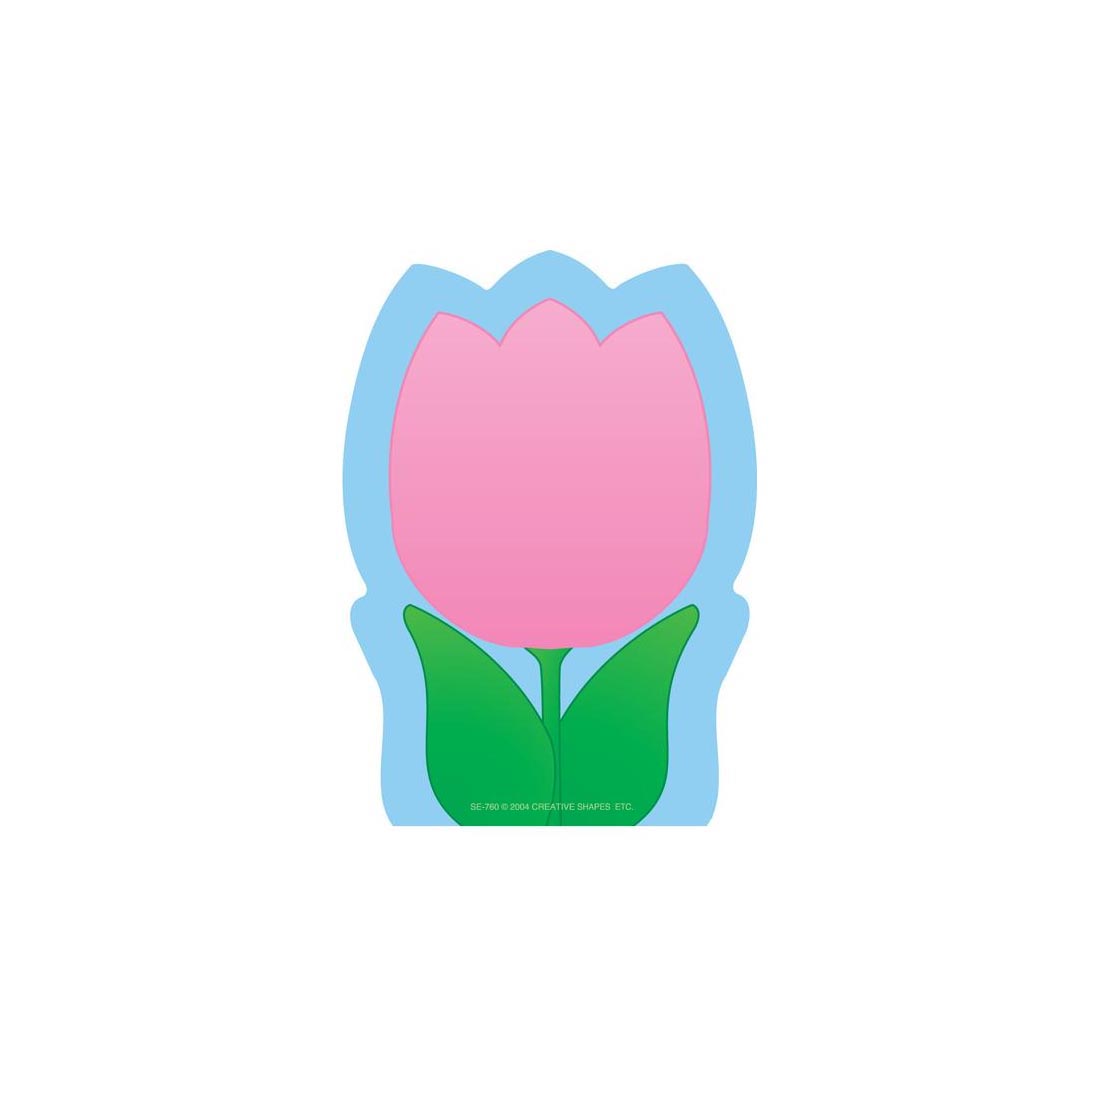 Tulip Notepad by Creative Shapes